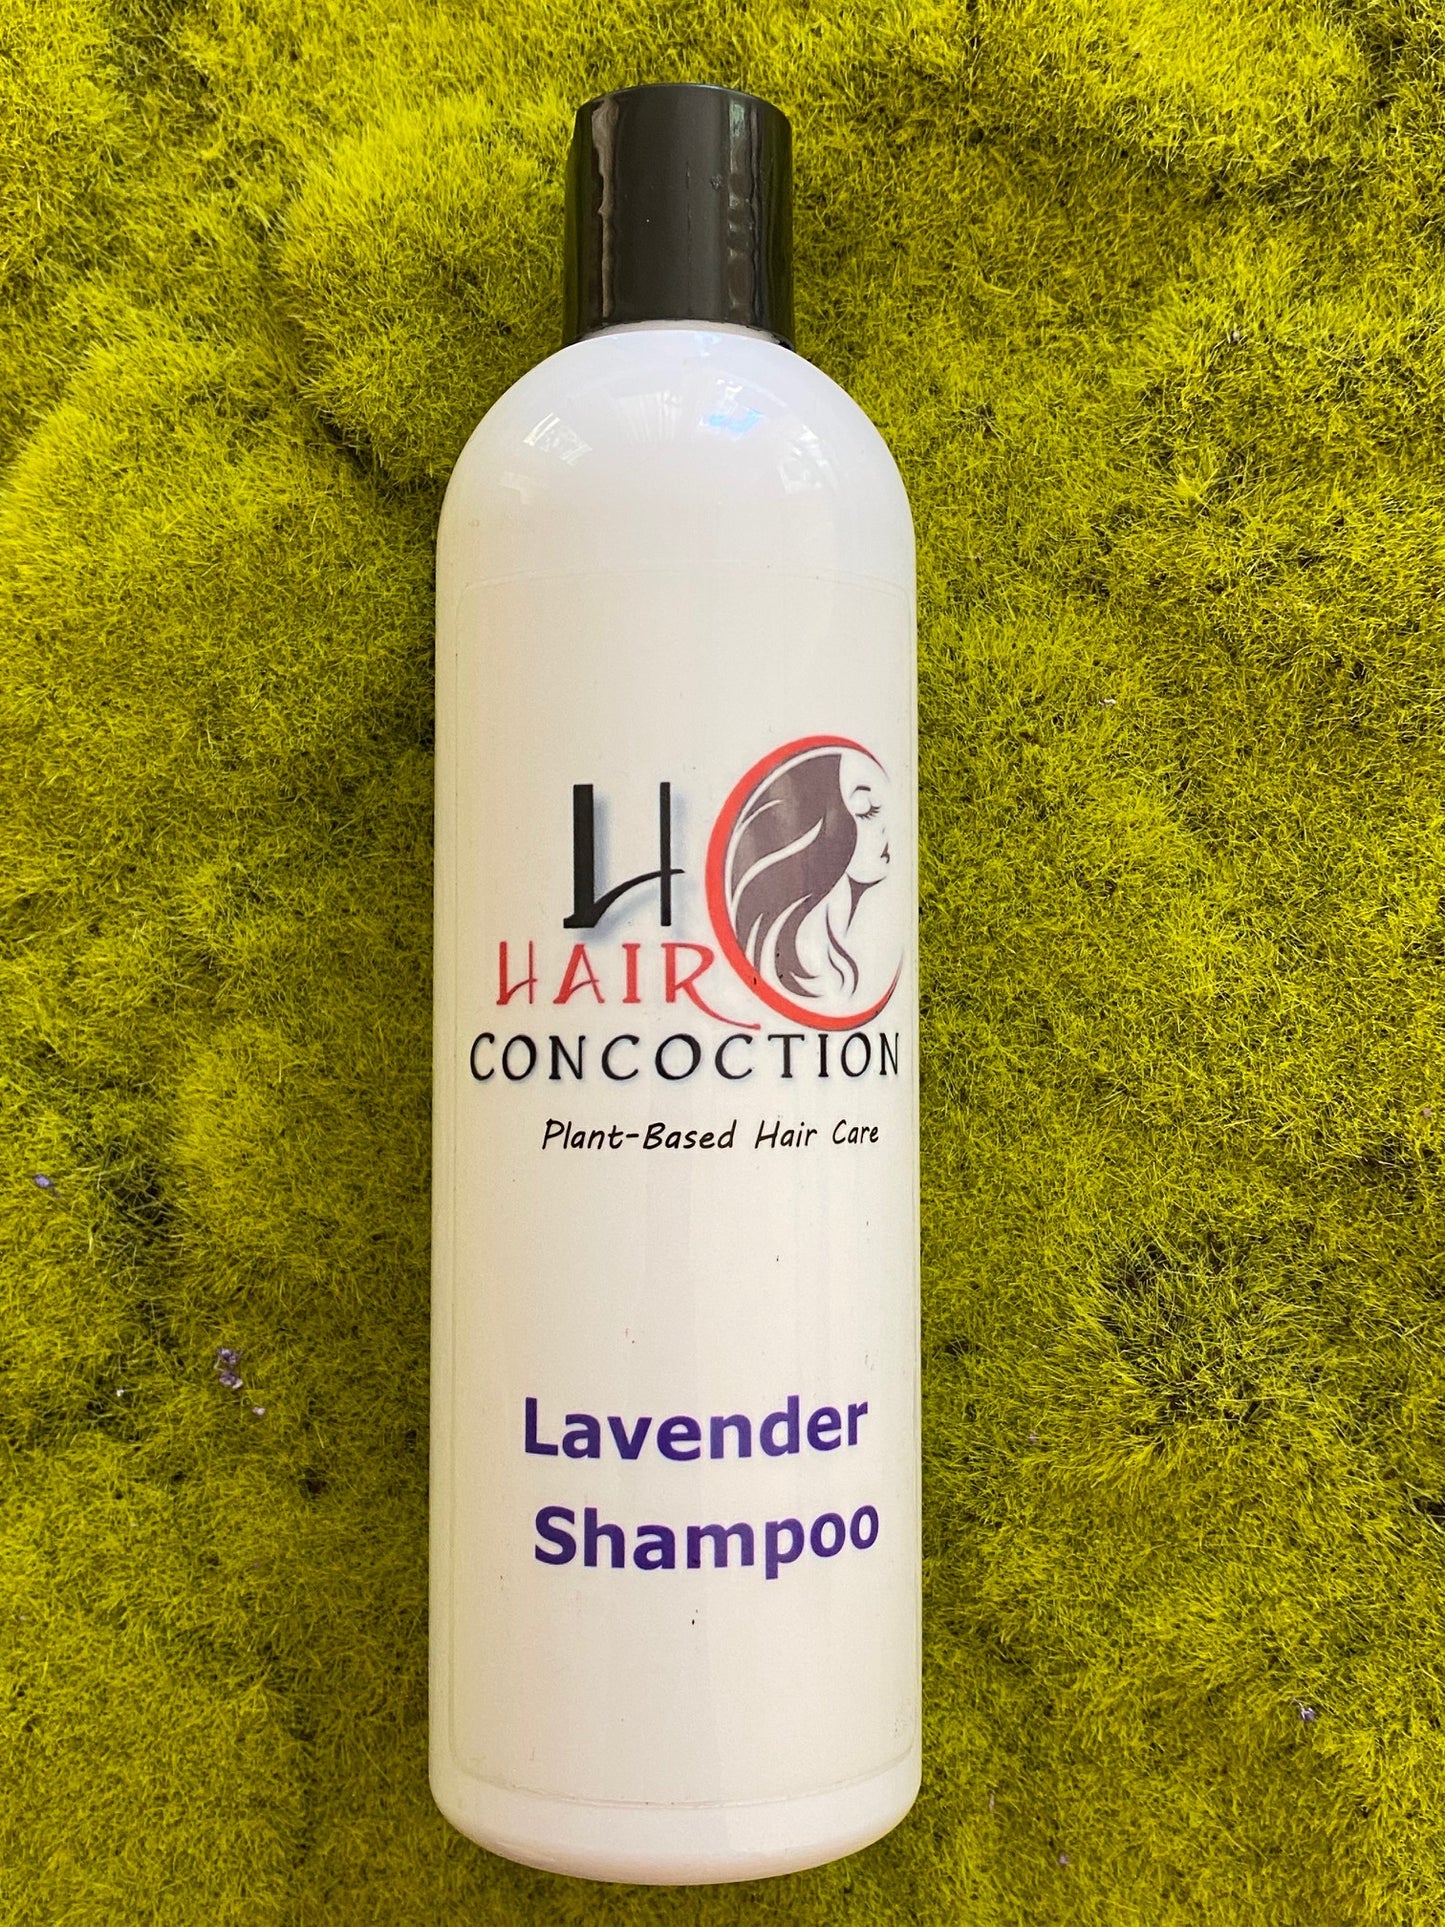 Lavender Shampoo is gentle enough for everyday use. Adds volume and promotes growth.  Lavender aromatics has calming aromatherapy benefits.  Combine with any Hair Concoction's Leave-In Conditioner Curling Activator Detangler for ultimate results.